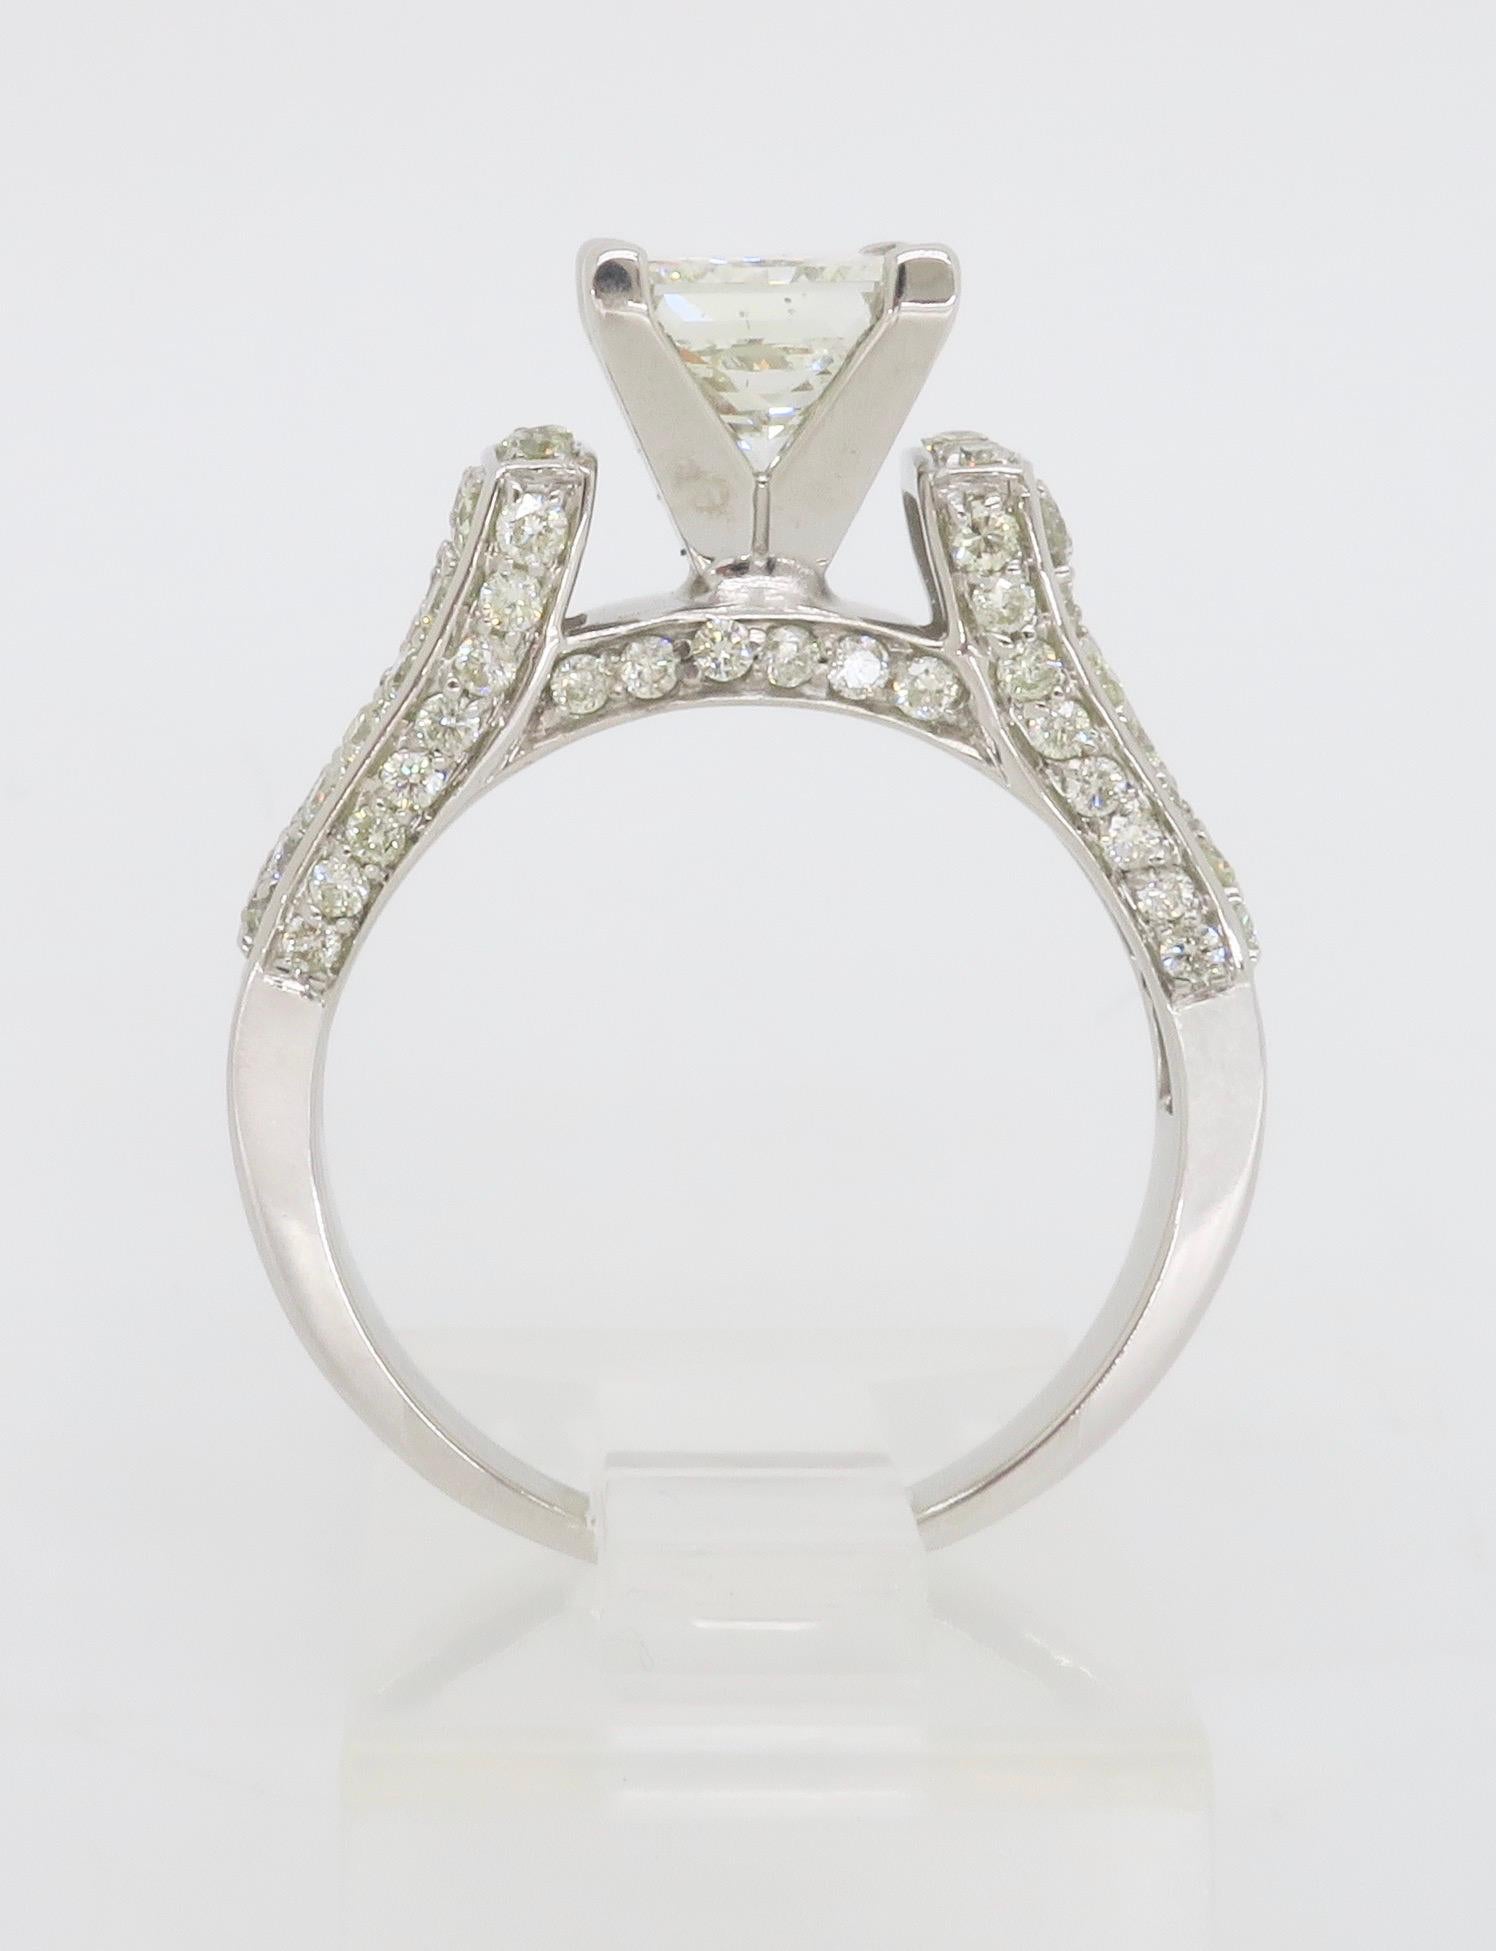 Certified 2.59ctw Princess Cut Diamond Engagement Ring For Sale 9